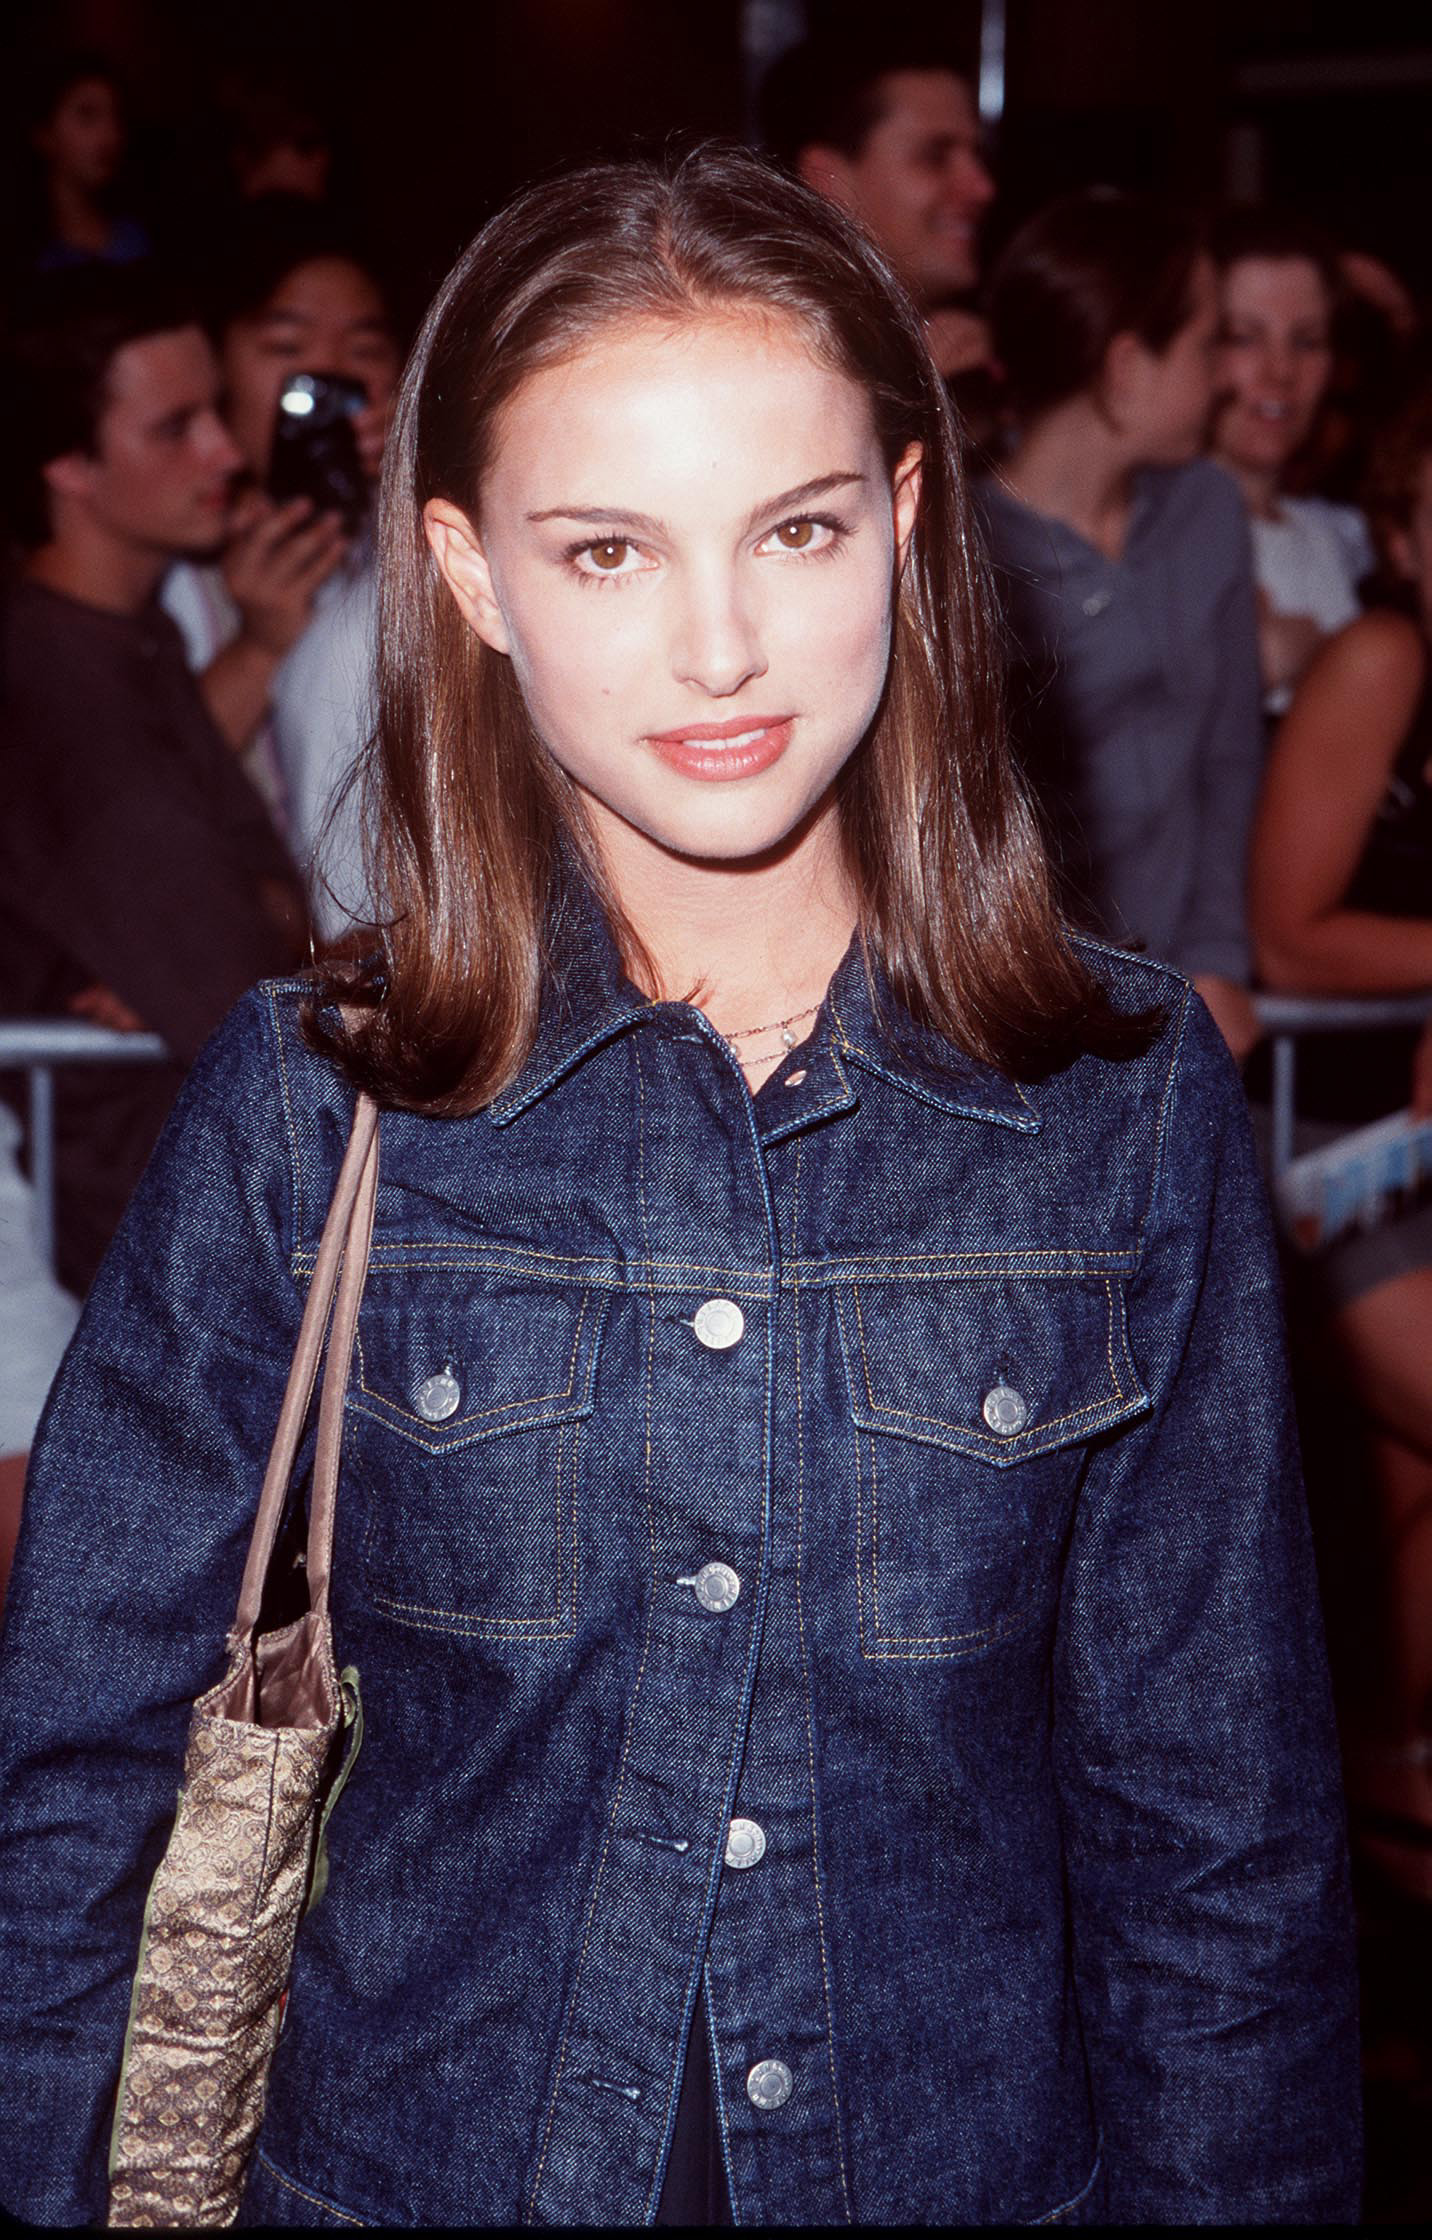 Natalie Portman at the premiere of "Saving Private Ryan" in Los Angeles on July 21, 1998. | Source: Getty Images